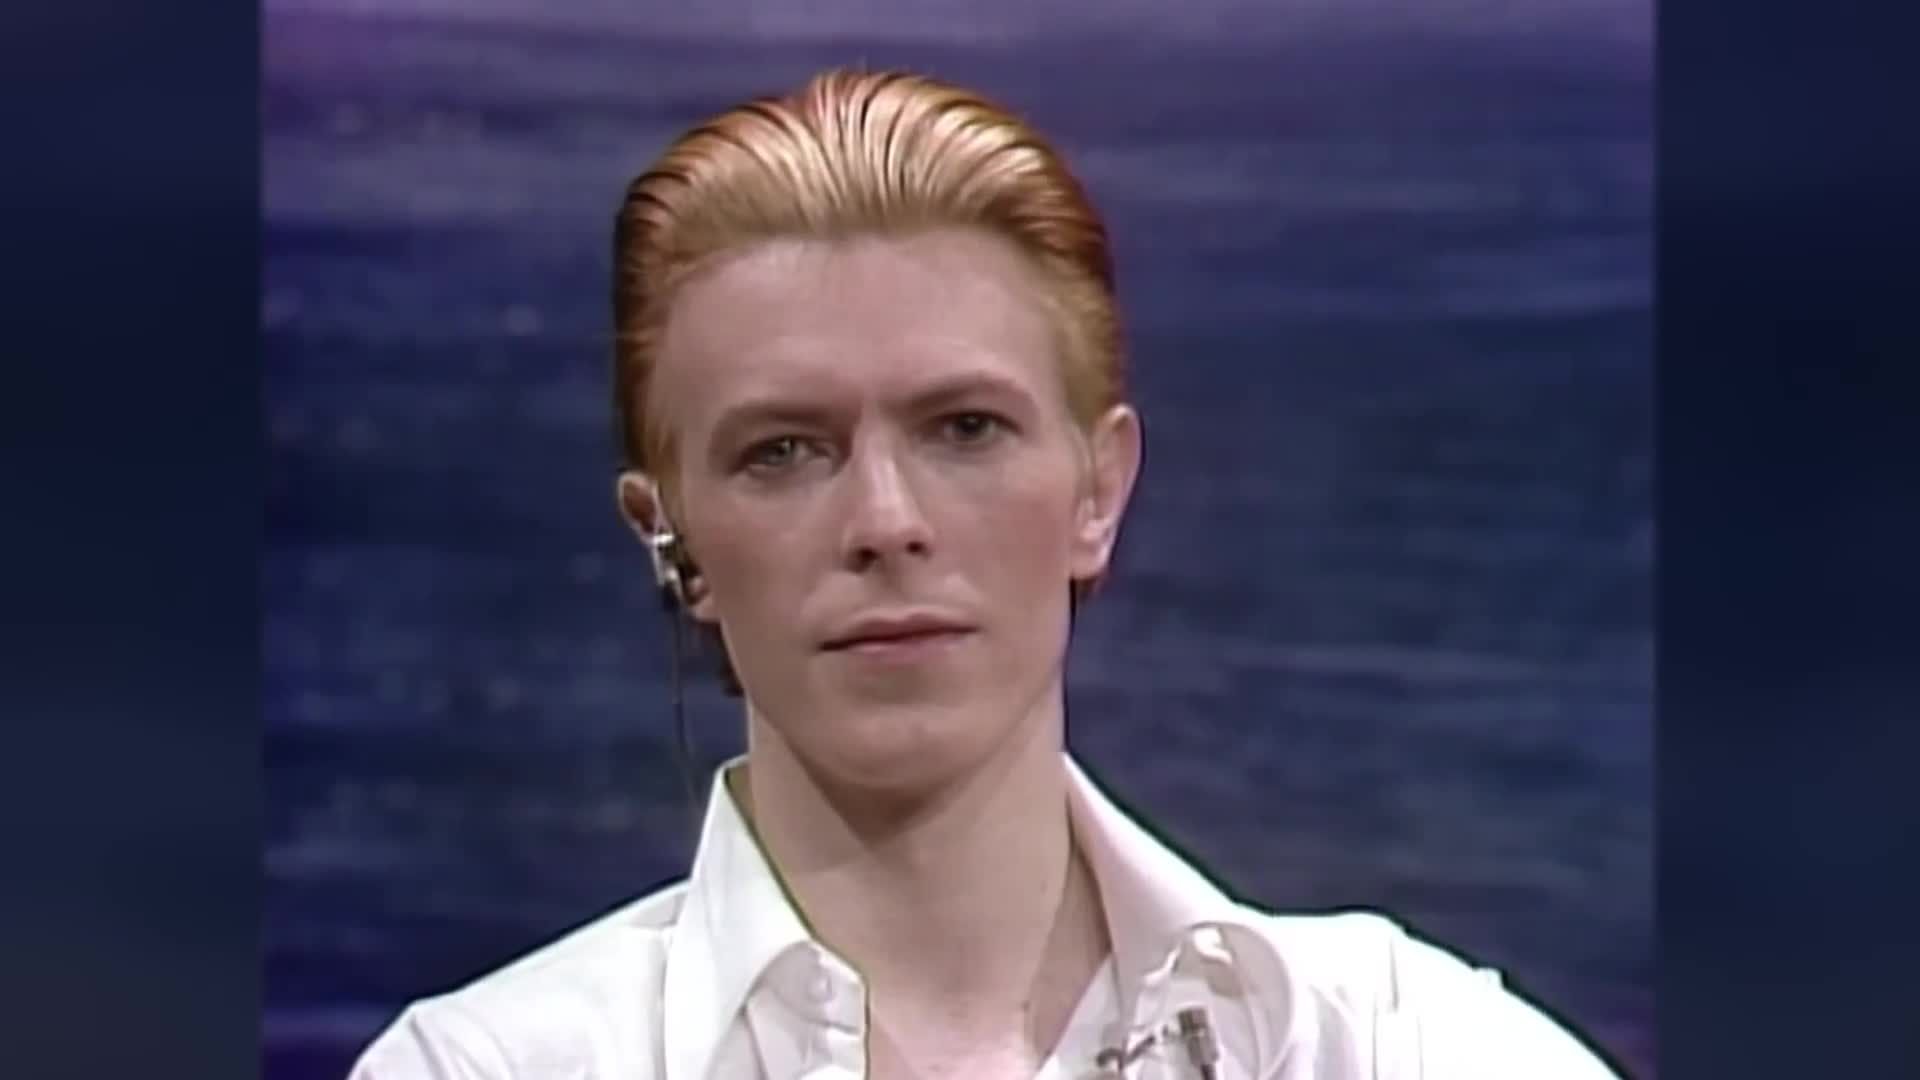 BOWIE: The Man Who Changed The World